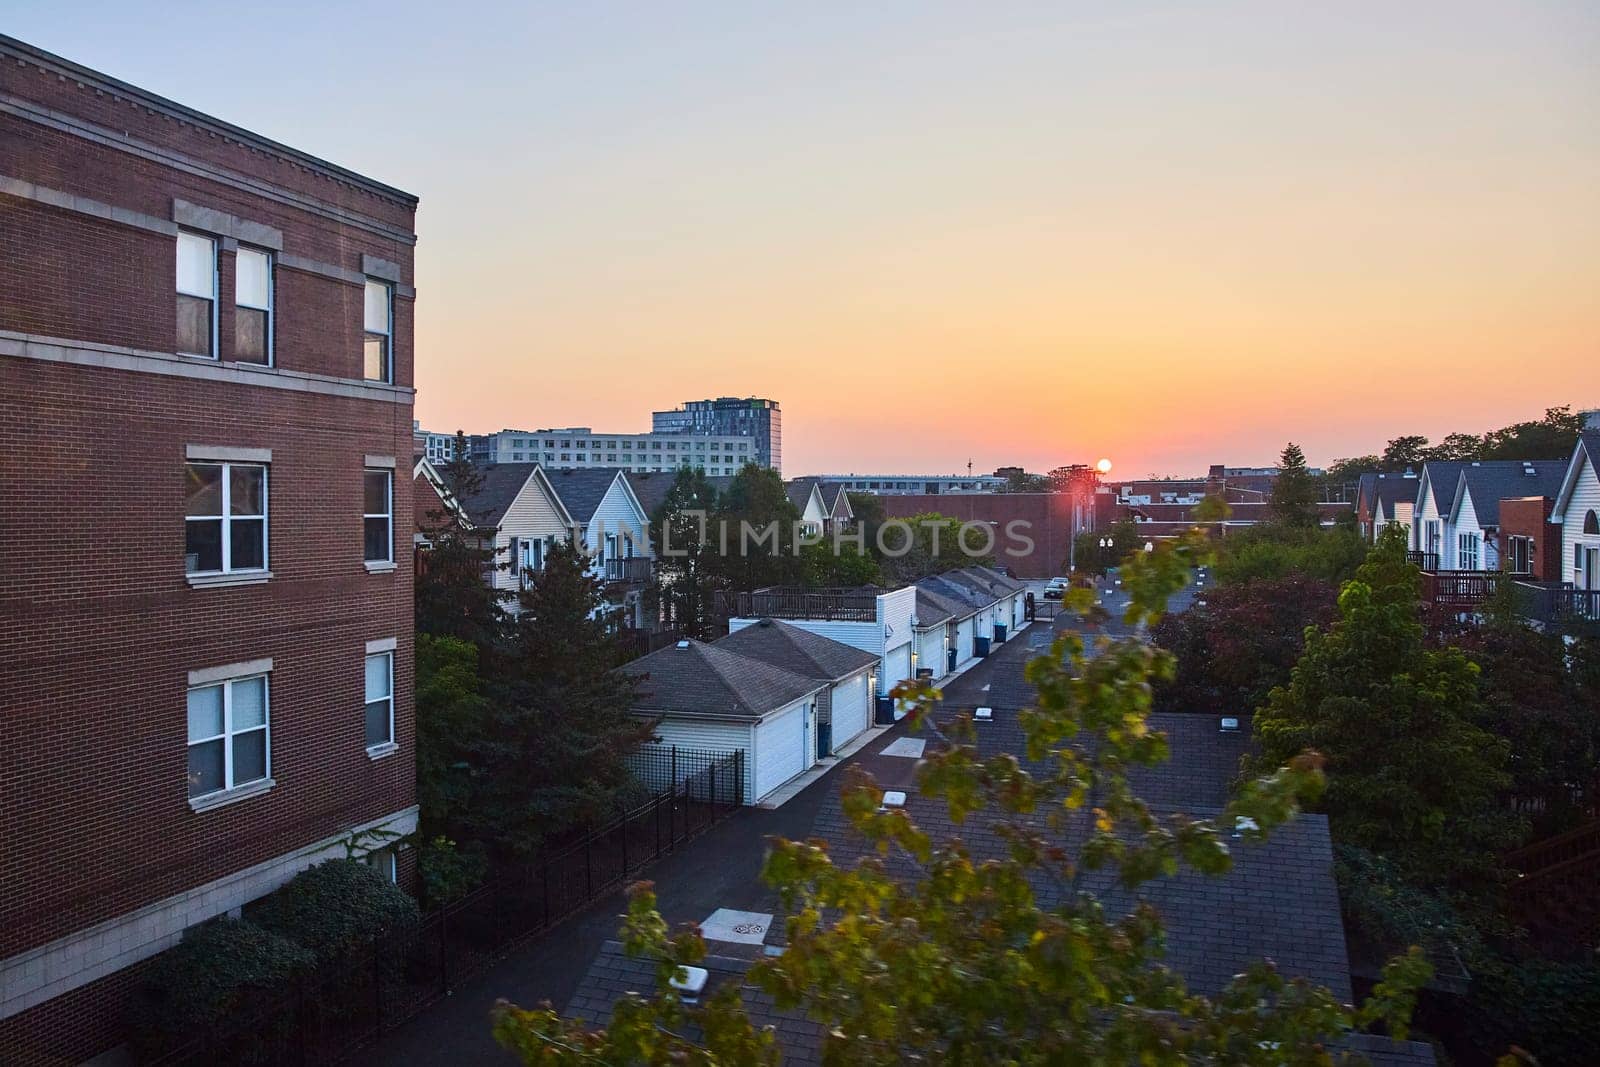 Image of Sun in distance rising over city buildings with rows of houses in Chicago, IL at sunset